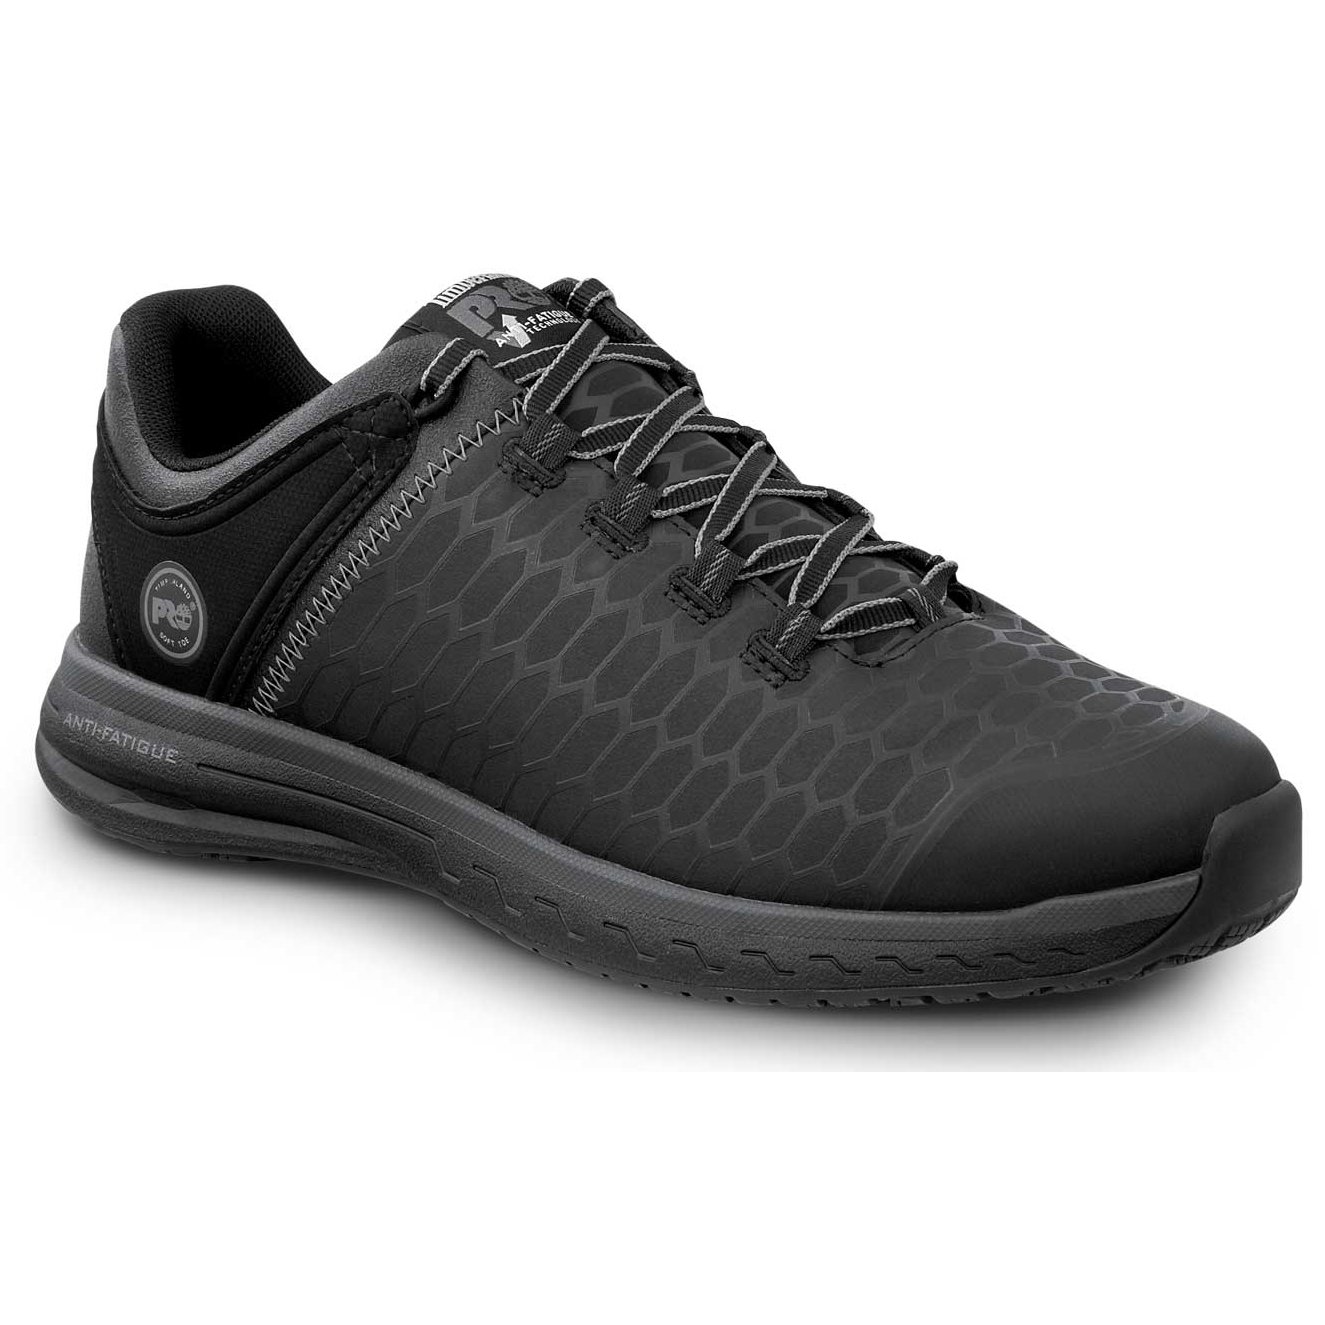 construcción naval frío Monumental SR Max | STMA1XQX Timberland PRO Powerdrive Men's Soft Toe EH Low Athletic